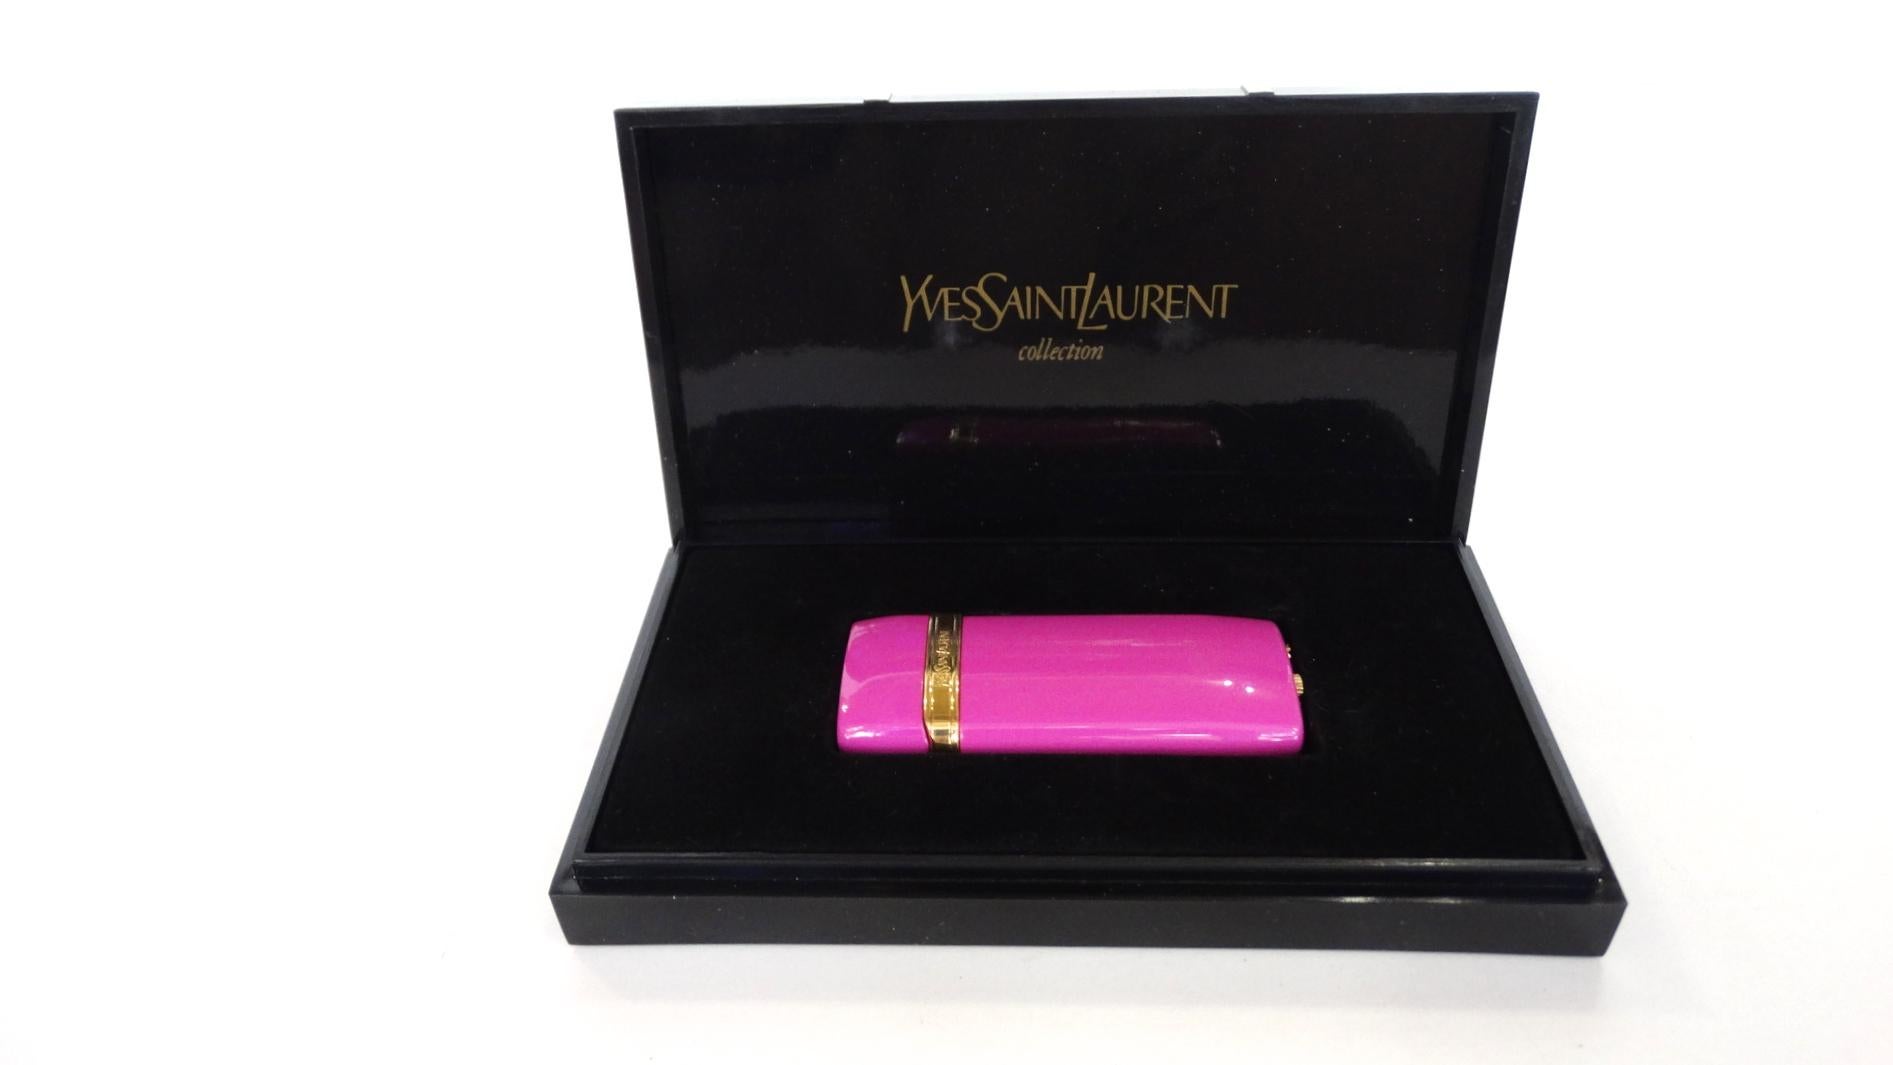 The Most Adorable Novelty Item Is Here! Created by Saint Laurent, this rare 60s Mini Louisiane lighter is hot pink and features gold plated hardware. Gold band is inscribed with 